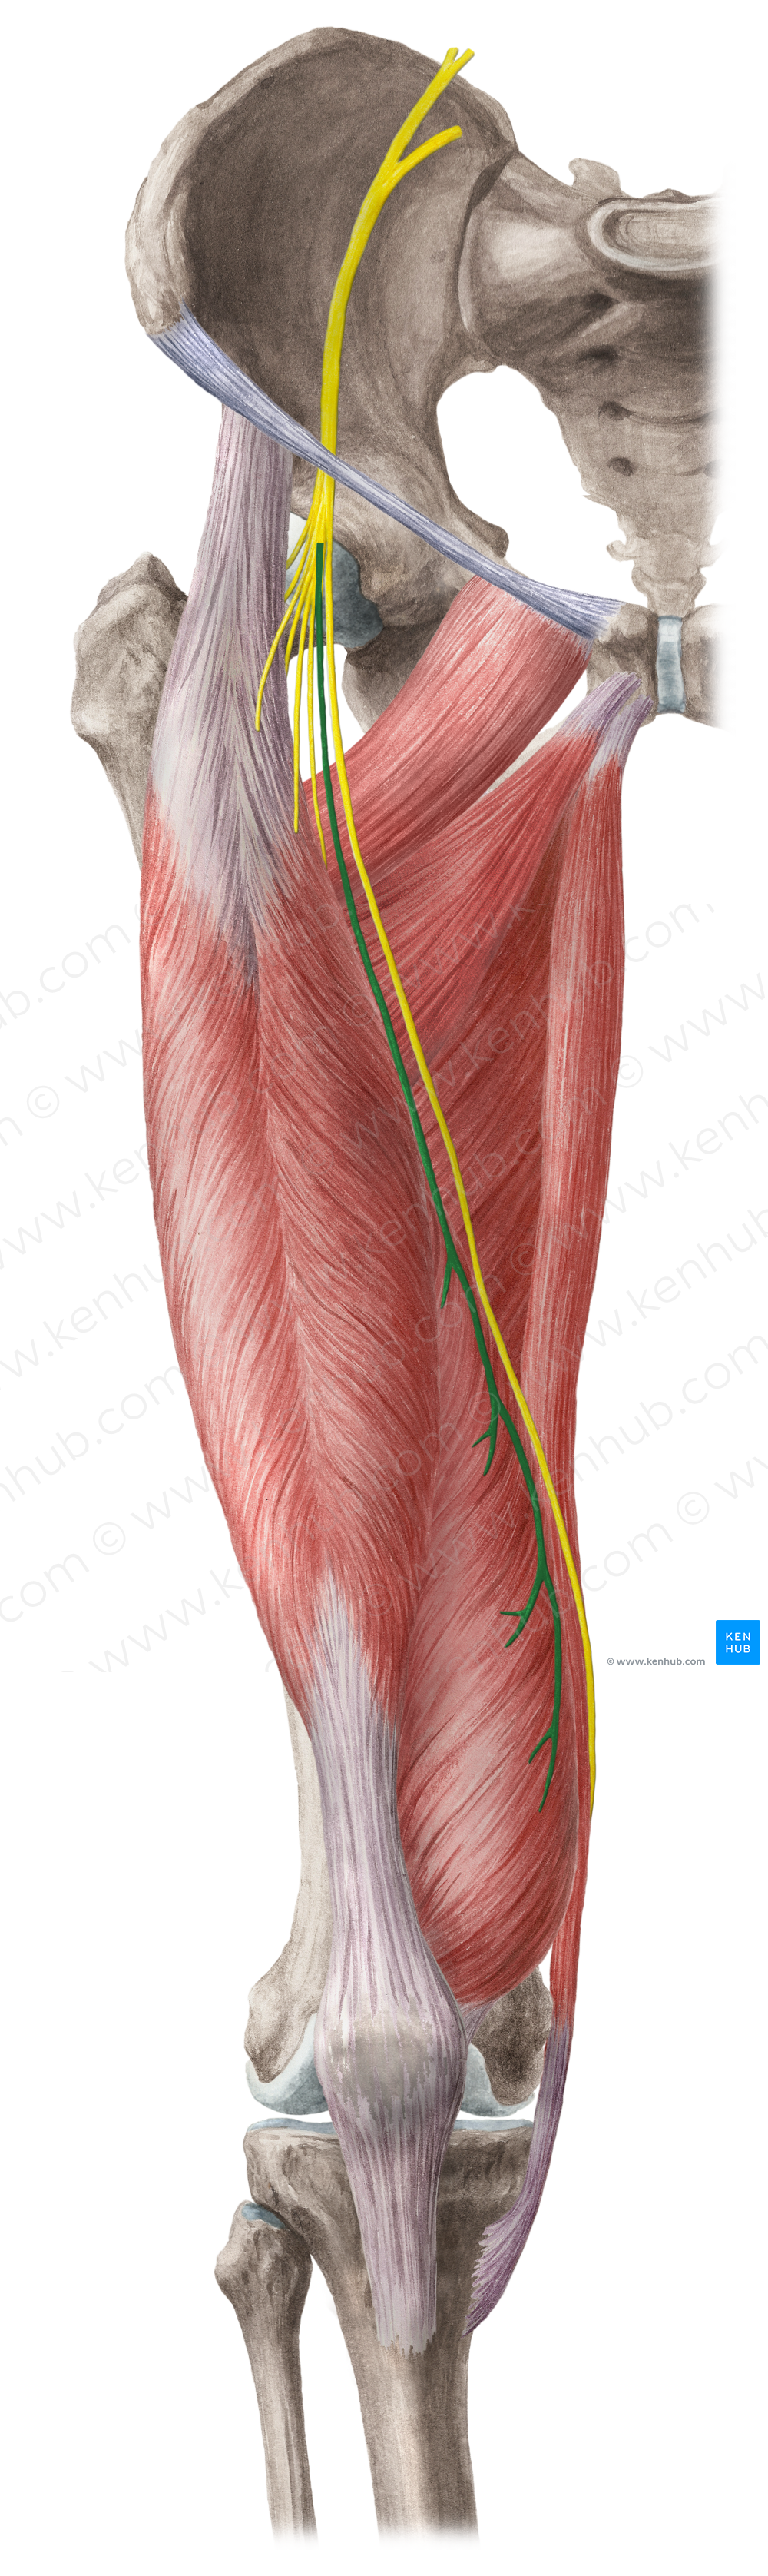 Muscular branches of femoral nerve (#8748)